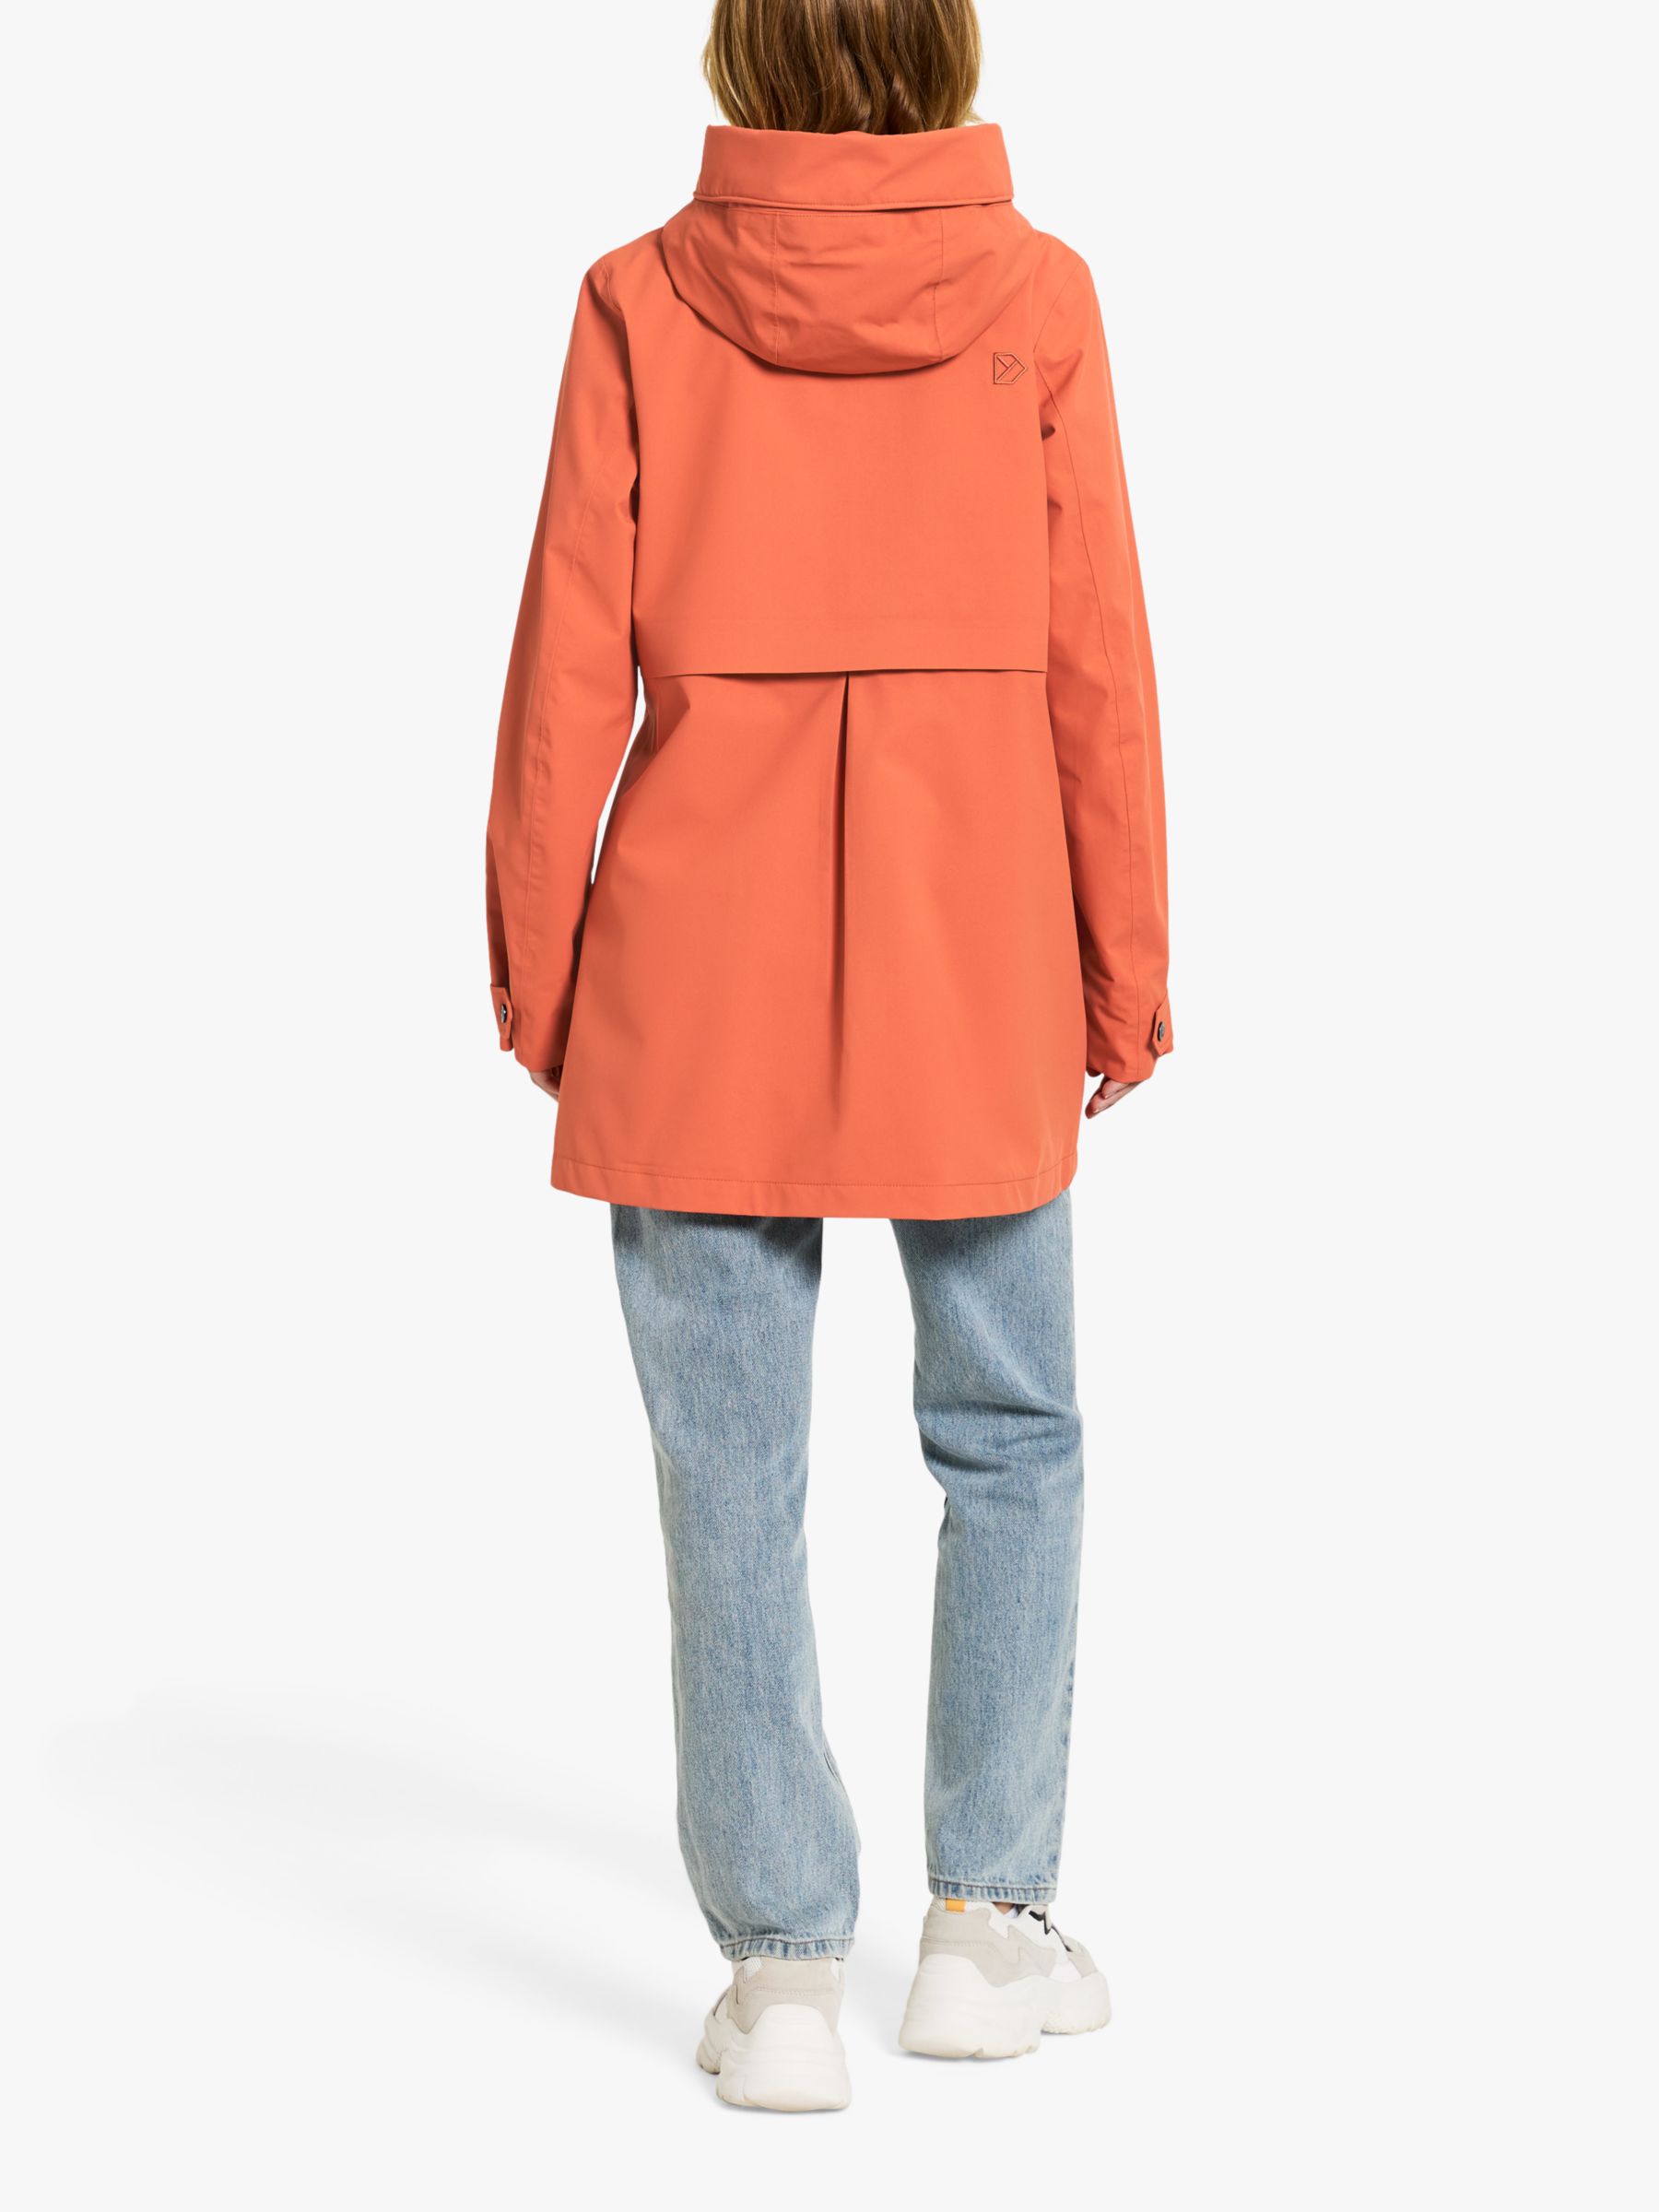 Buy Didriksons Edith Waterproof Parka, Brique Red Online at johnlewis.com